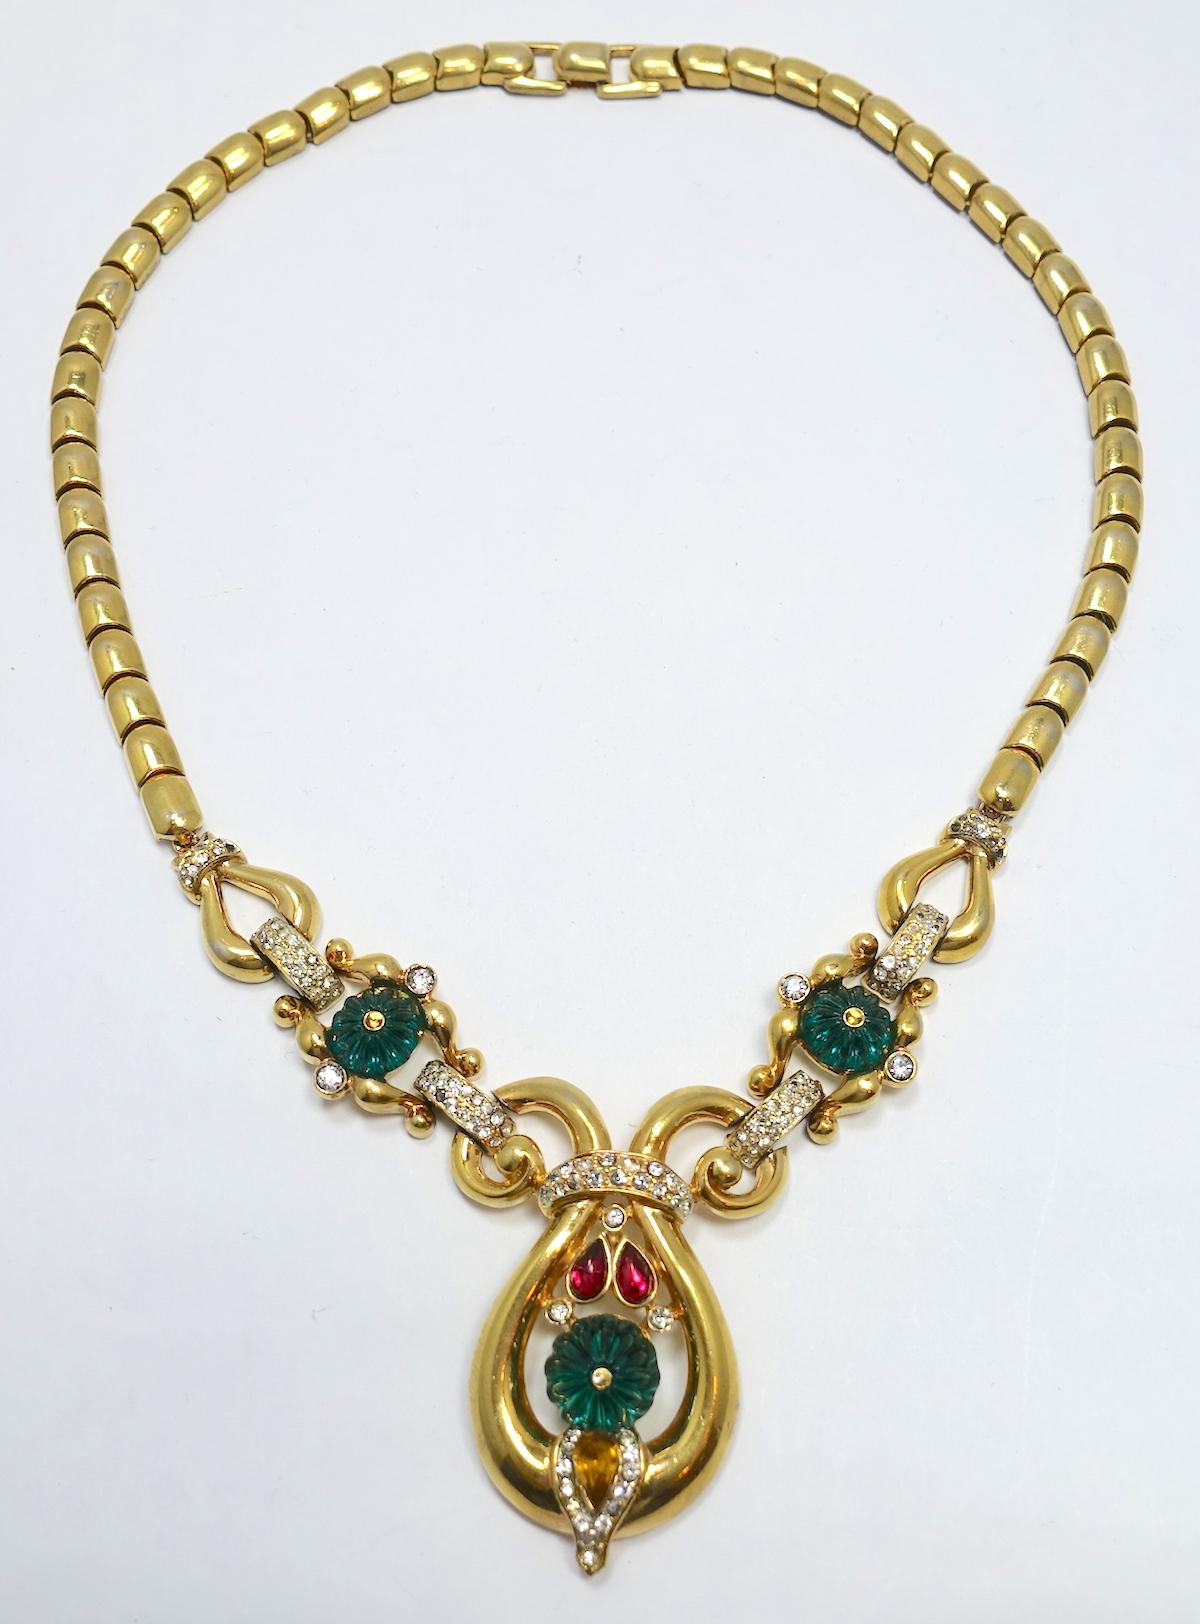 This vintage signed Trifari necklace is famous and featured in many books. It has Trifari’s famous mogul design with red, green and clear rhinestones in a gold tone setting. This necklace measures 16-1/2” long with a fold-over clasp. The front drop